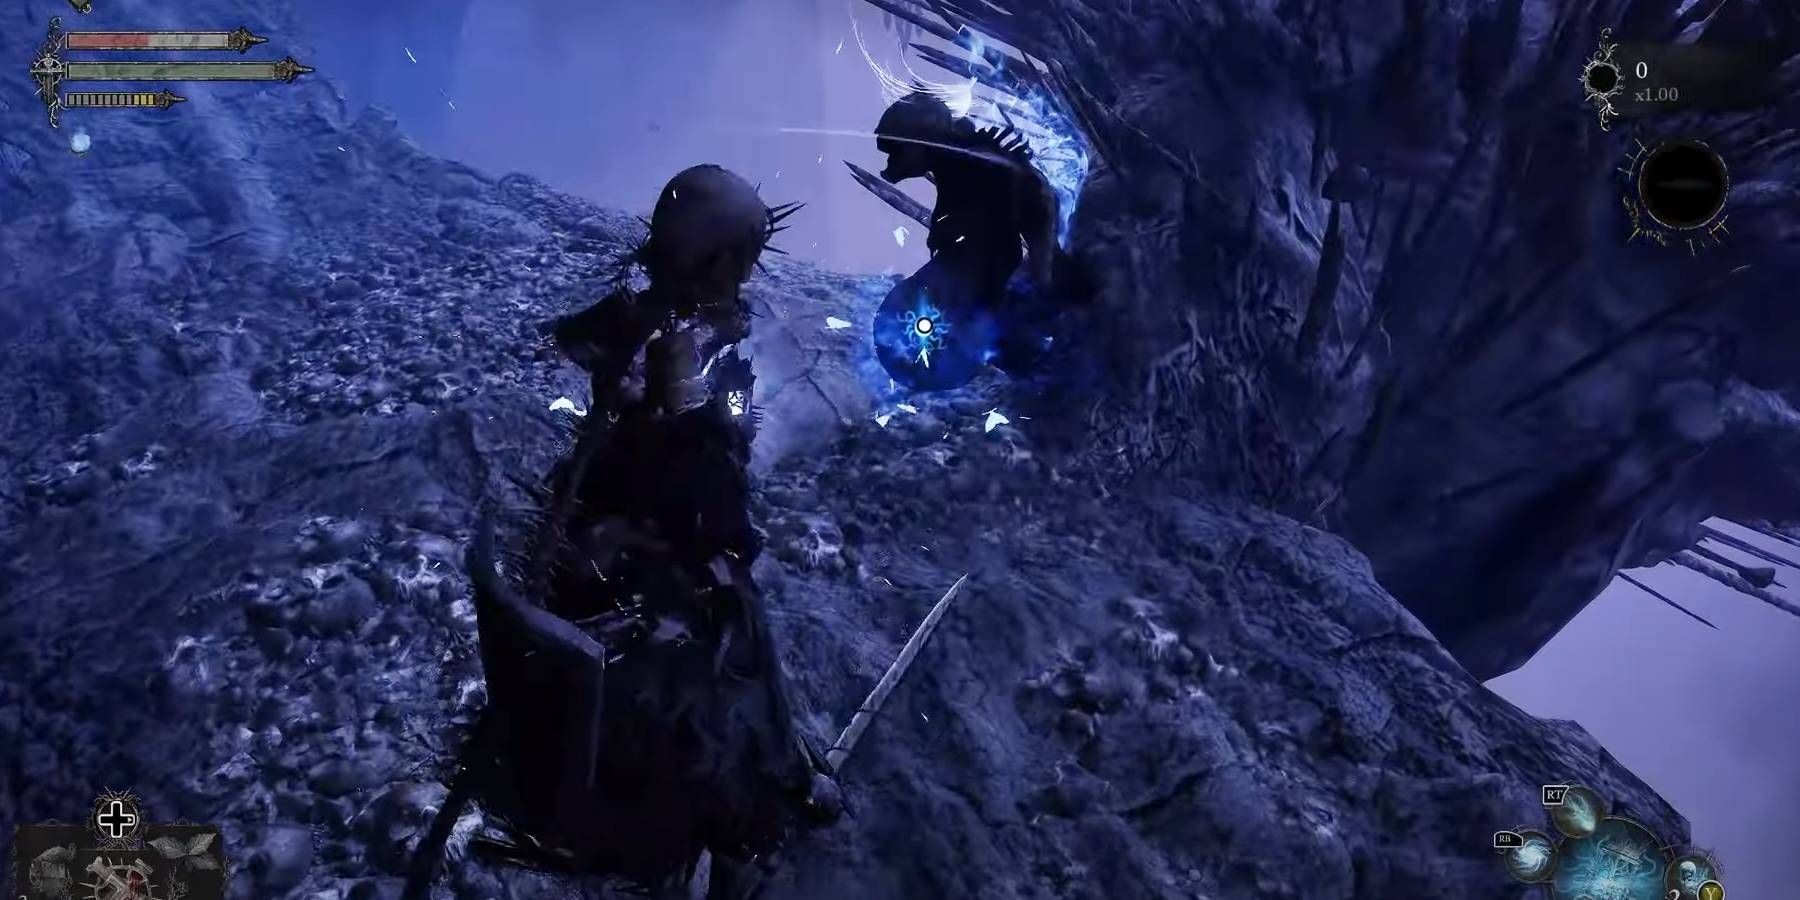 These beginner tips will help break down some of Lords of the Fallen's complex gameplay.